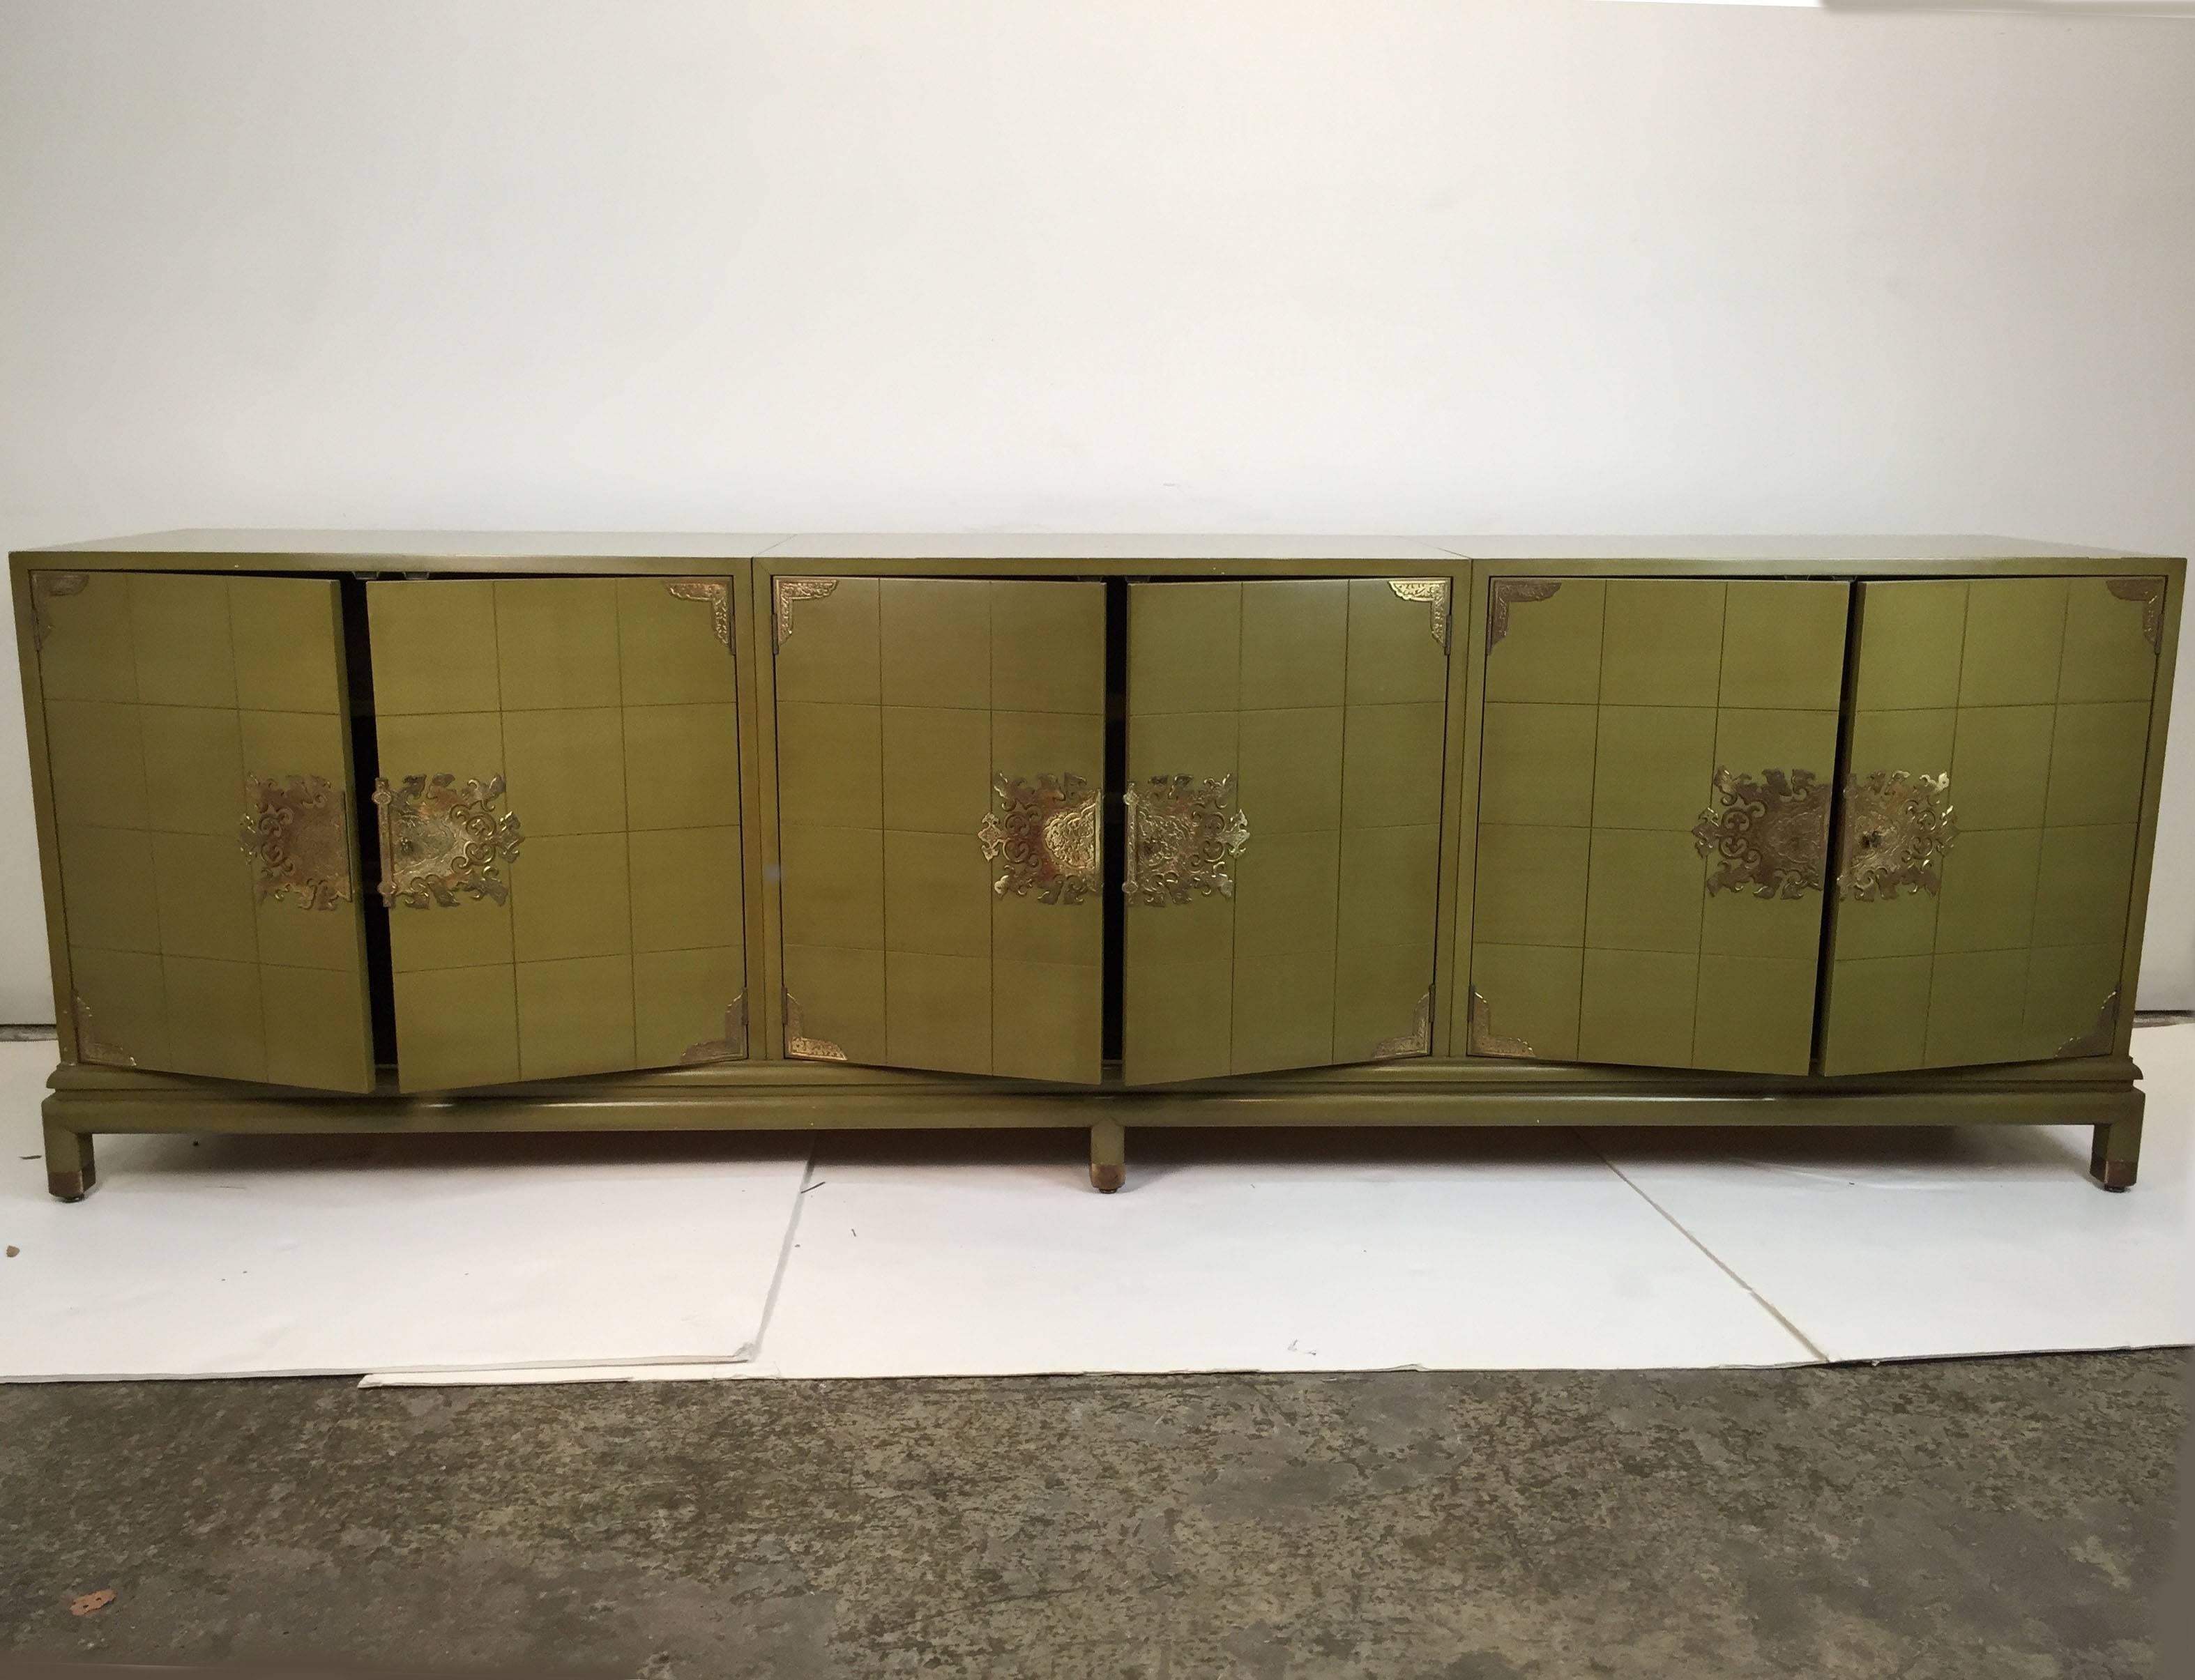 This monumental cabinet is finished on all four sides, which is a reflection of the superior quality craftsmanship and dedication to detail by the designer. 
Our in-house restoration team can provide a quote to custom finish this piece for you in